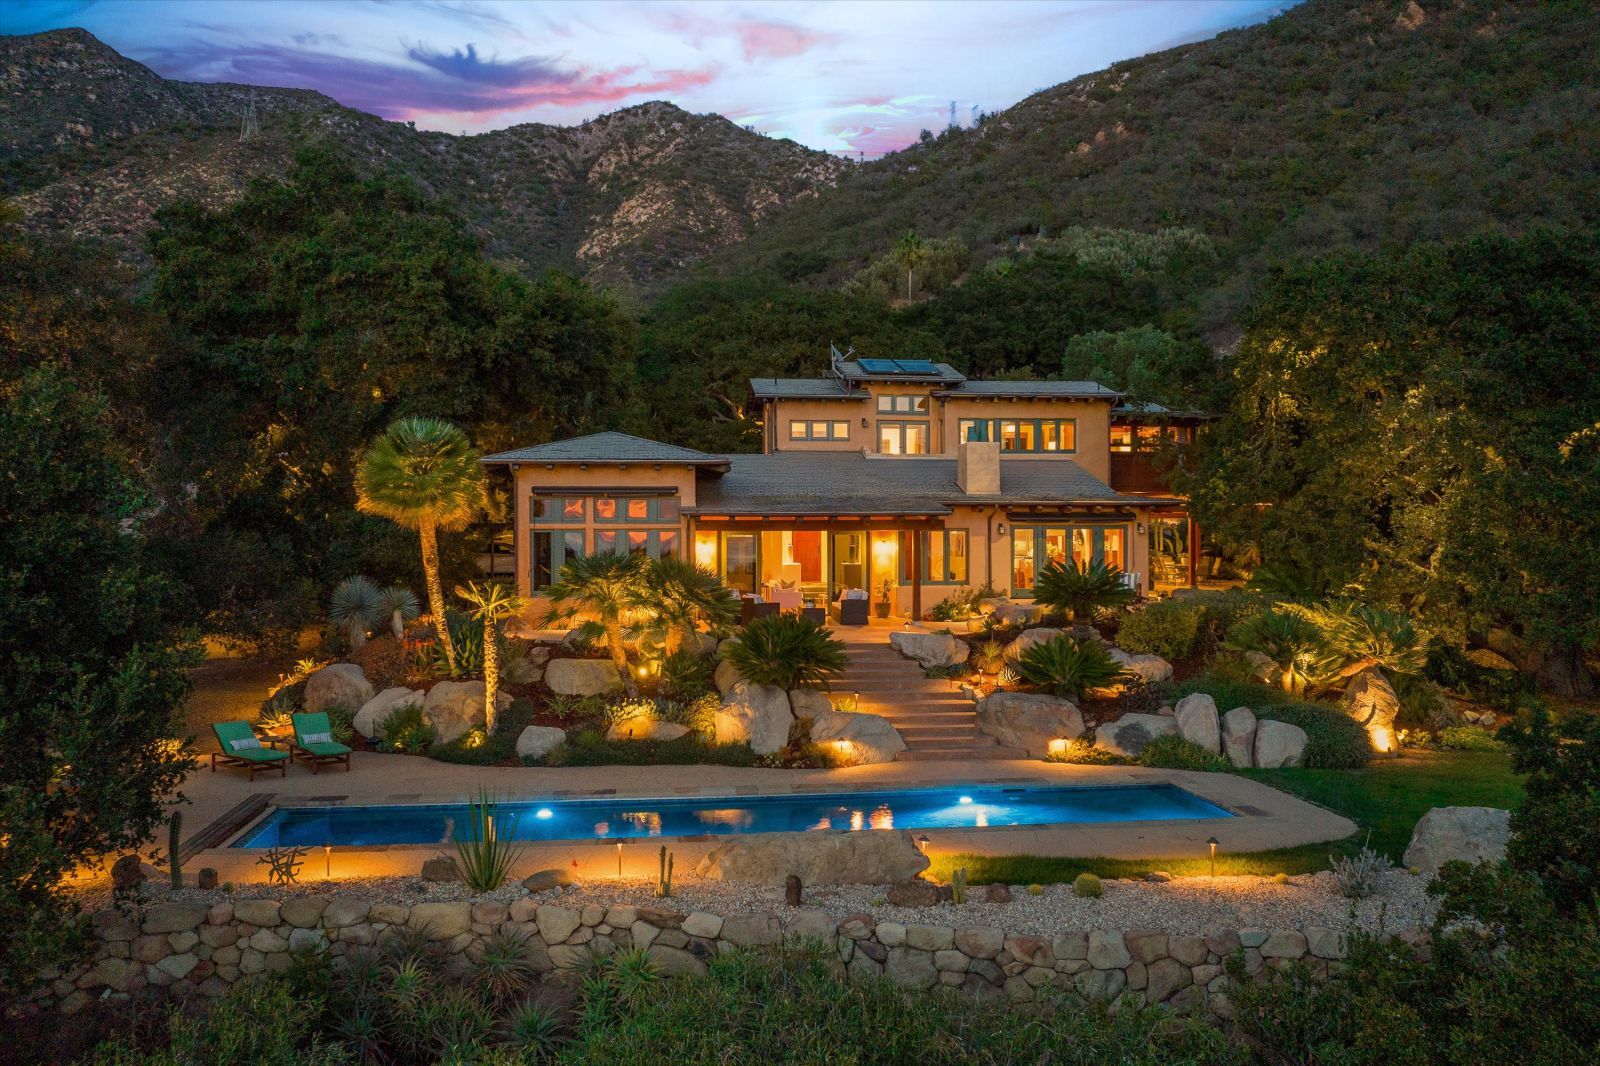 A Craftsman inspired, Mediterranean influenced home at dusk, set against a hillside with mountains in the background,illuminated from within, and with a beautiful backyard with lighted pool.